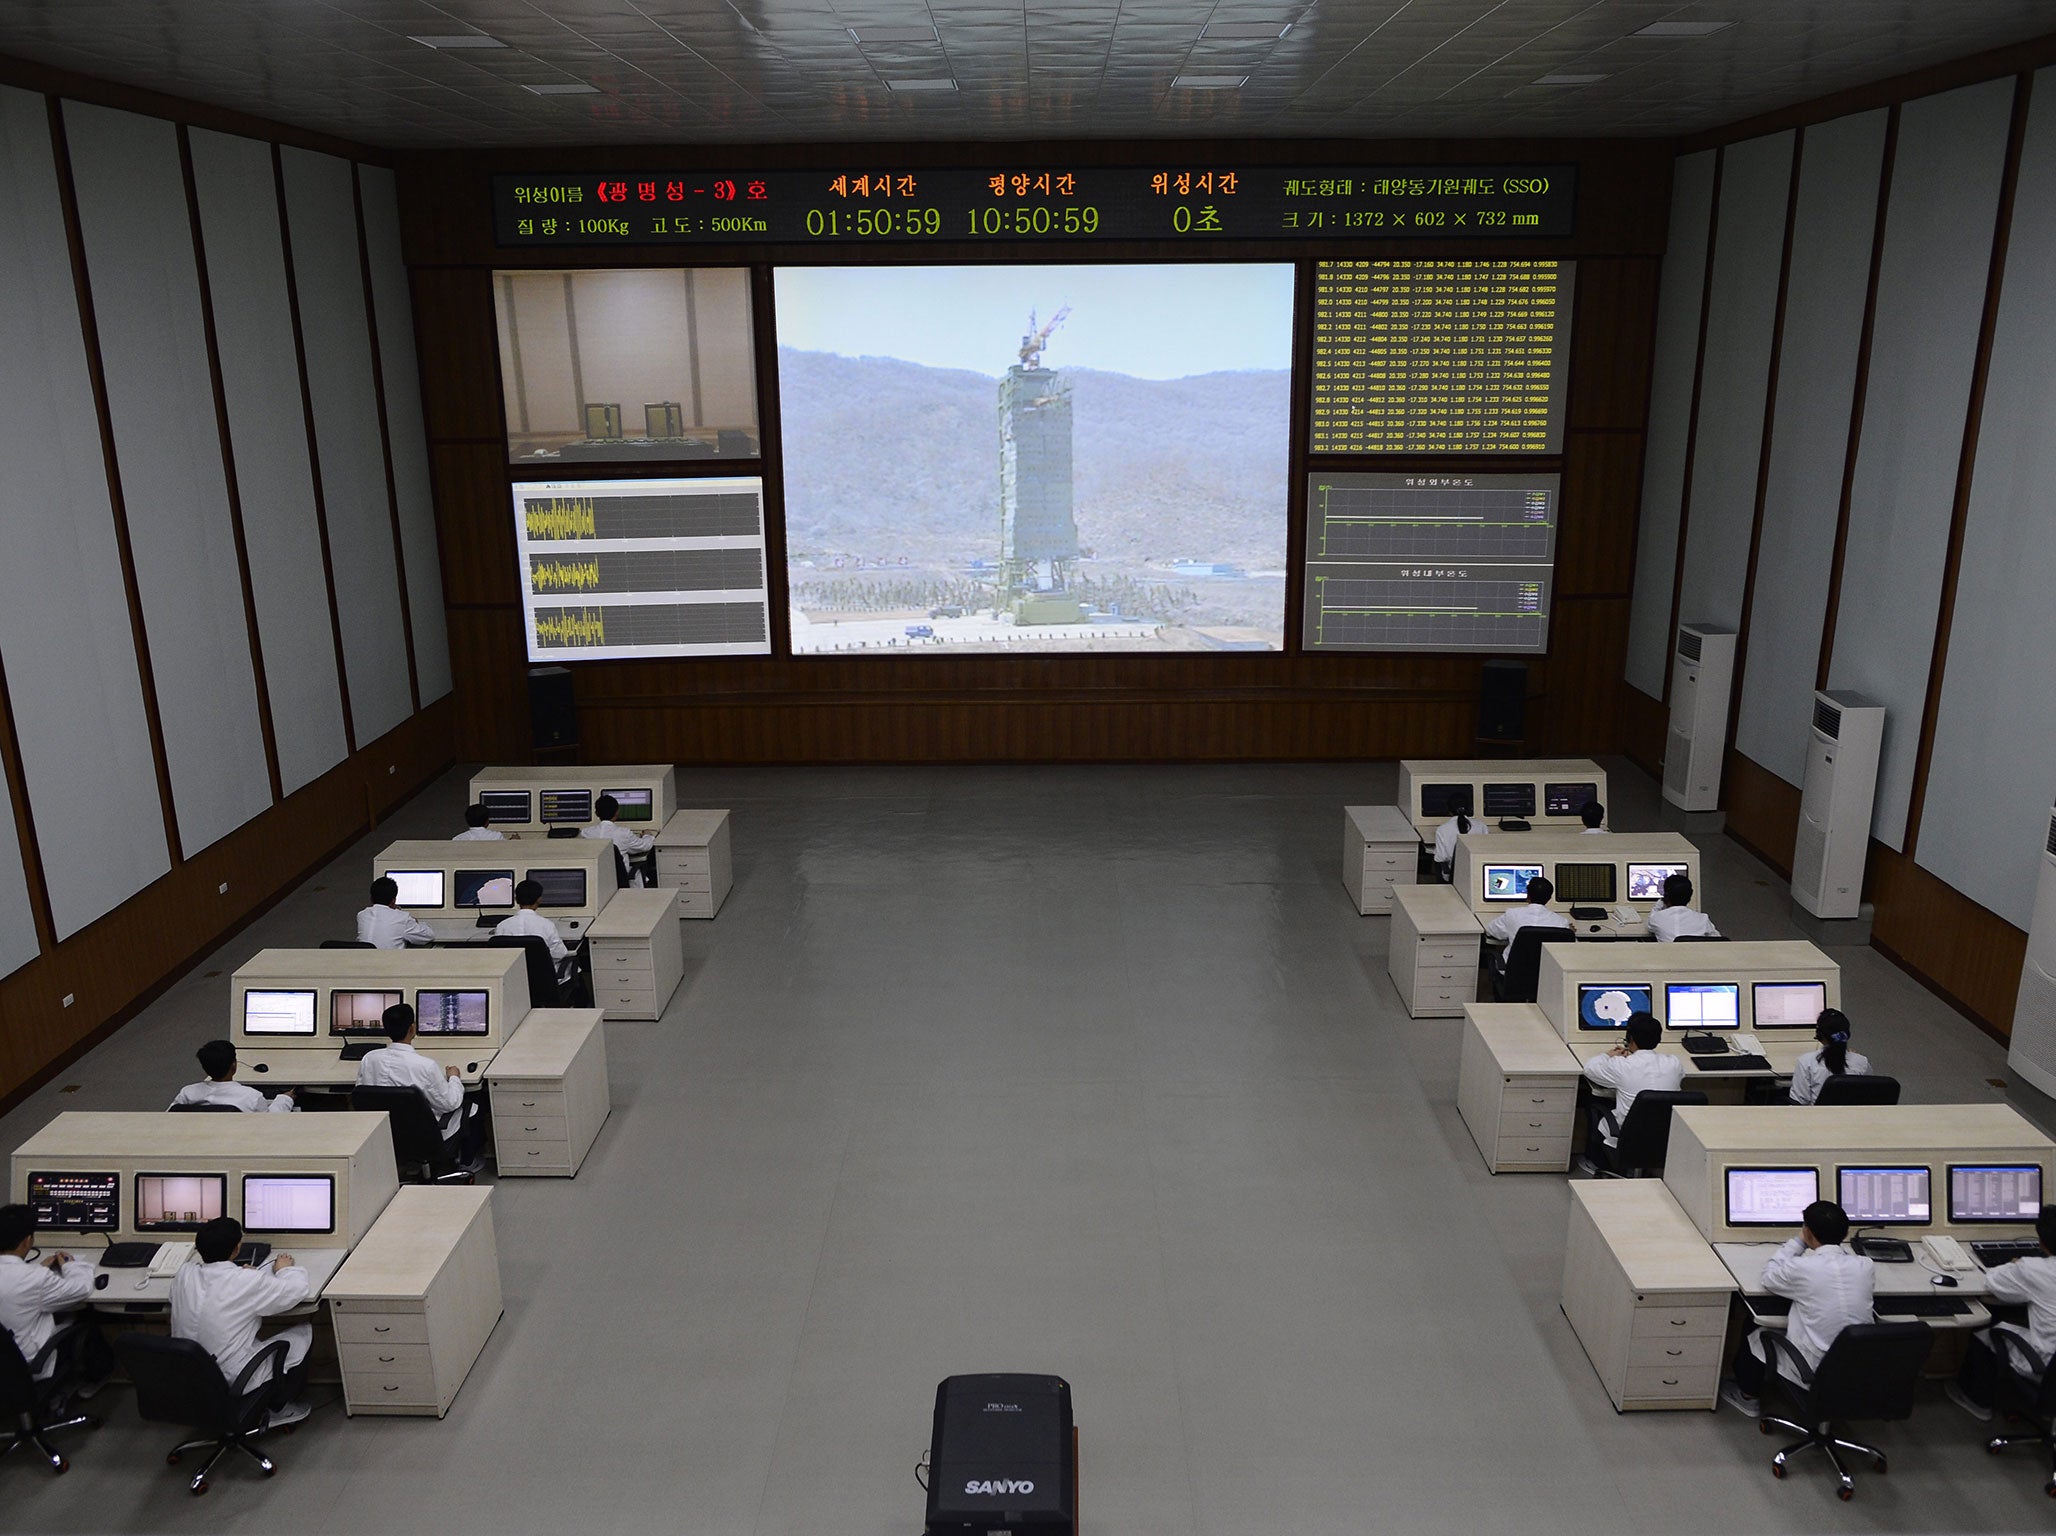 North Korea technicians watch live images of the rocket Unah-3 at the satellite control room of the space center on the outskirts of Pyongyang on April 11, 2012